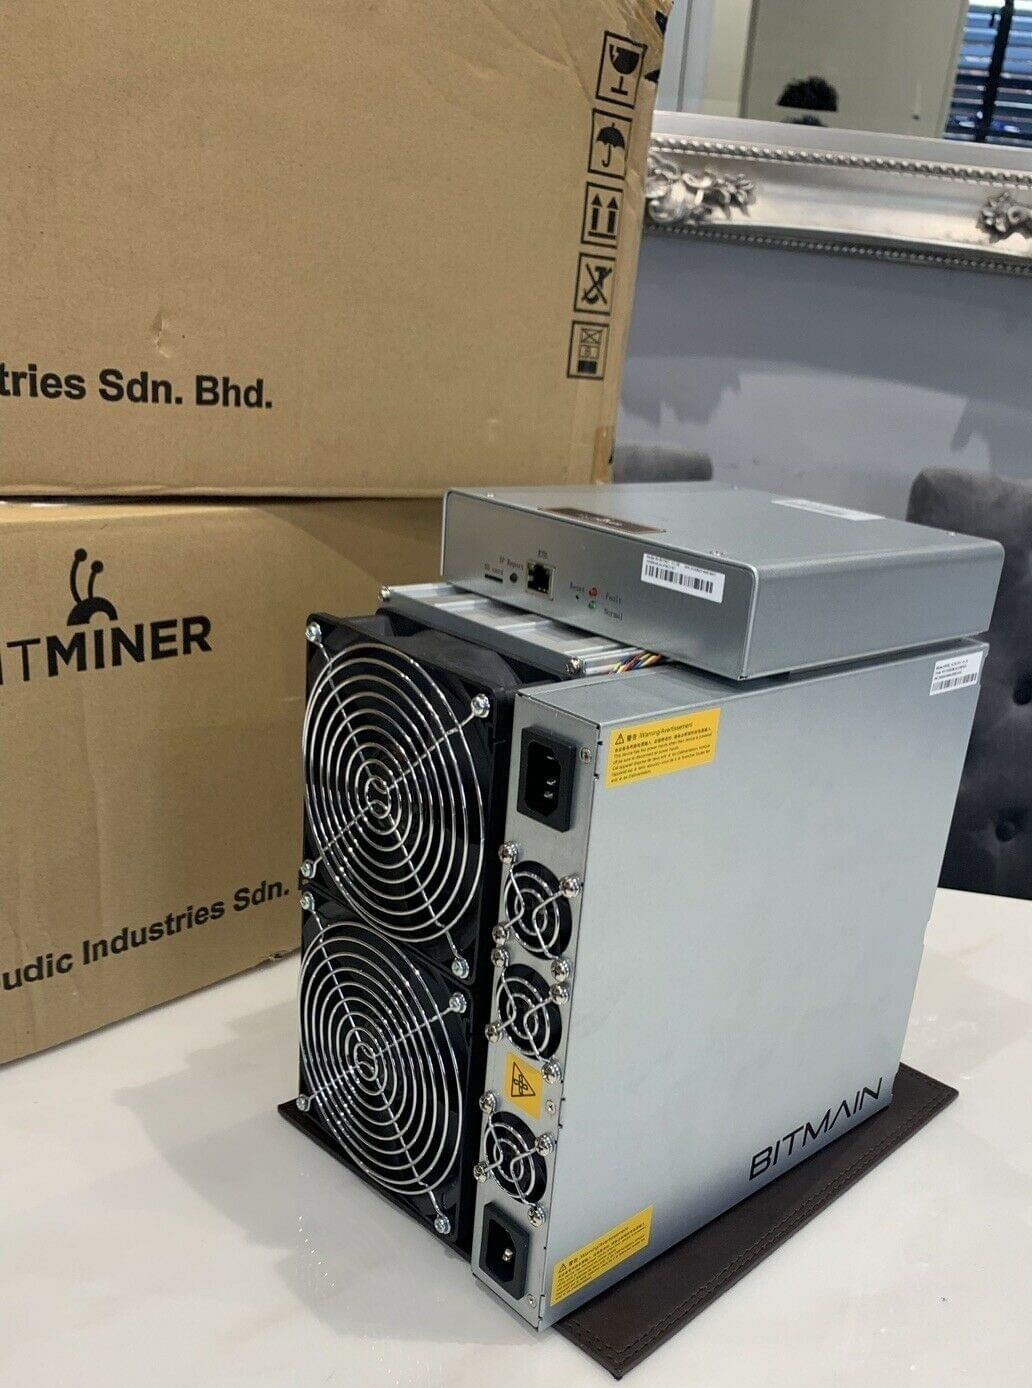 Antminer s21 pro. Antminer s19 Pro 110th. Bitmain Antminer s19j Pro. Antminer s19j Pro 104. Antminer s19j Pro Pro 104th.